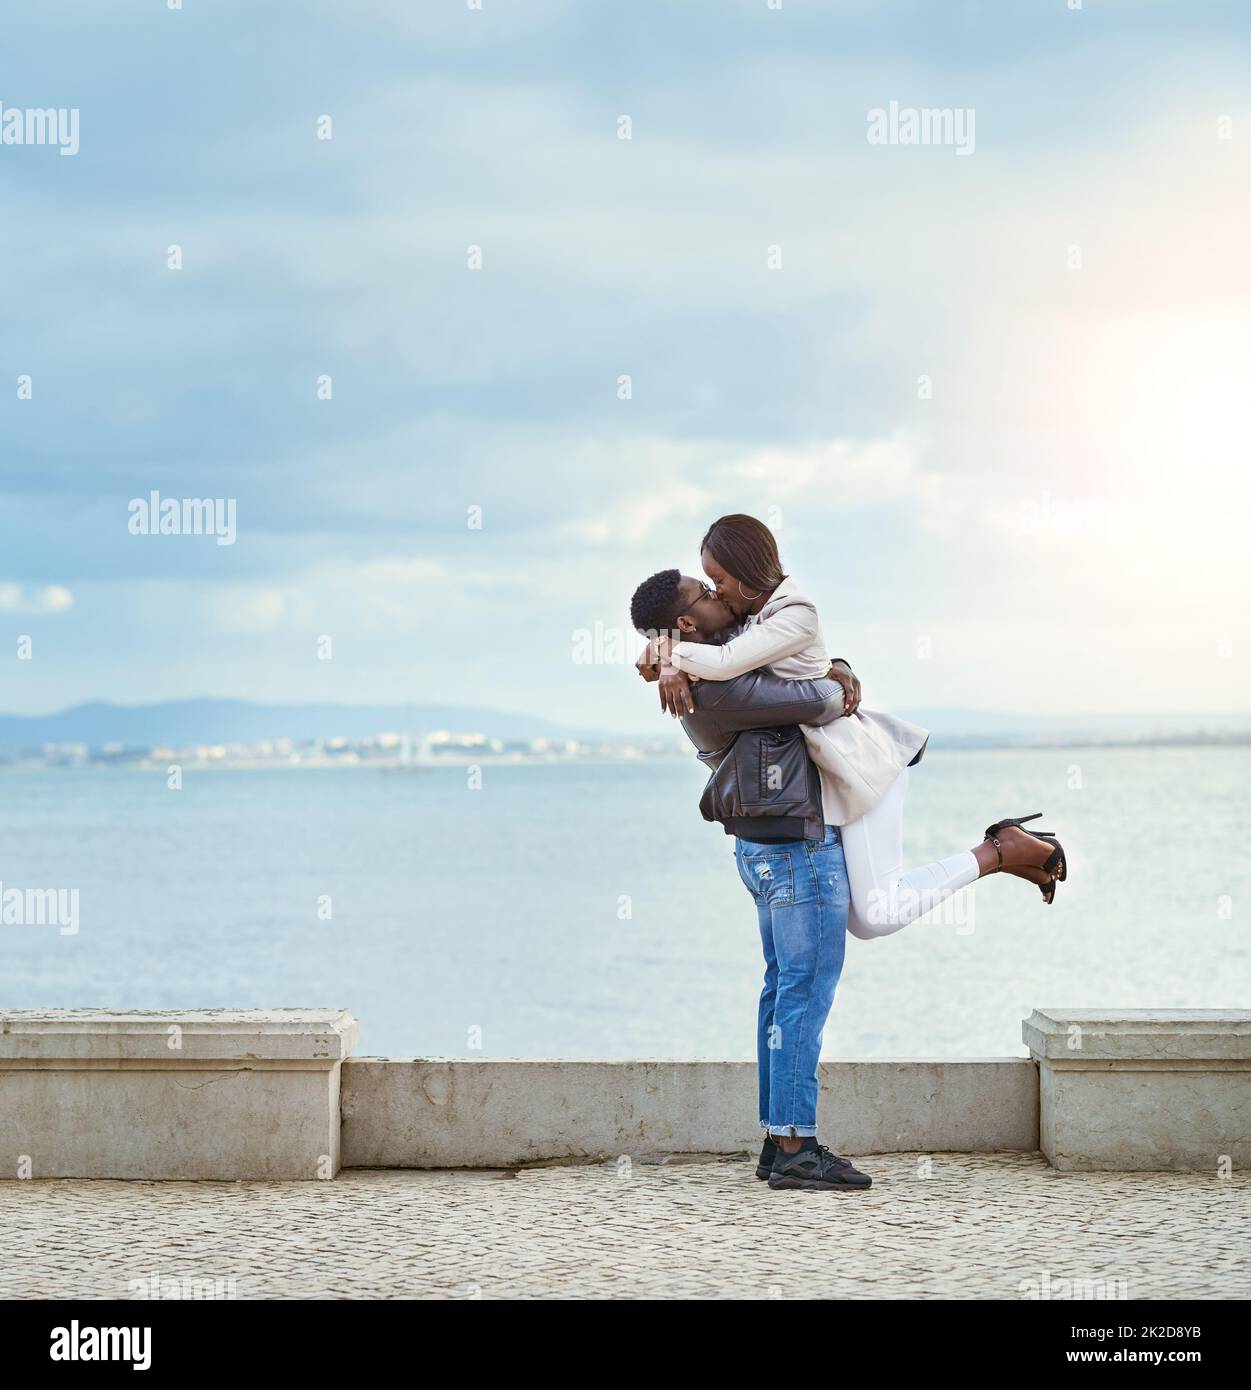 Being with you is bliss. Shot of an affectionate young couple bonding together outdoors. Stock Photo